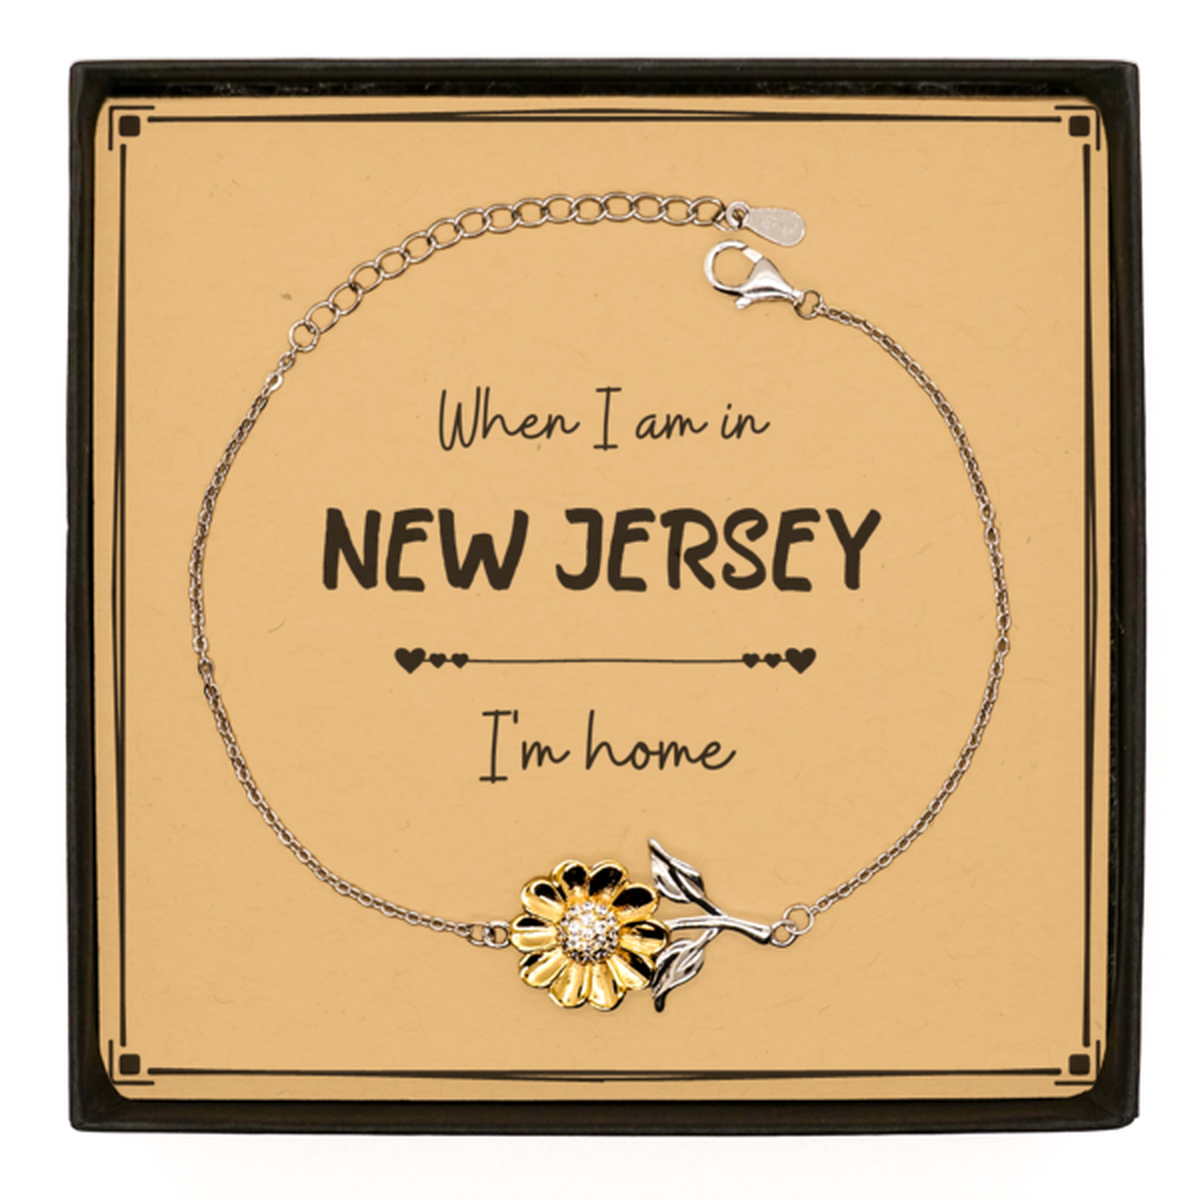 When I am in New Jersey I'm home Sunflower Bracelet, Message Card Gifts For New Jersey, State New Jersey Birthday Gifts for Friends Coworker